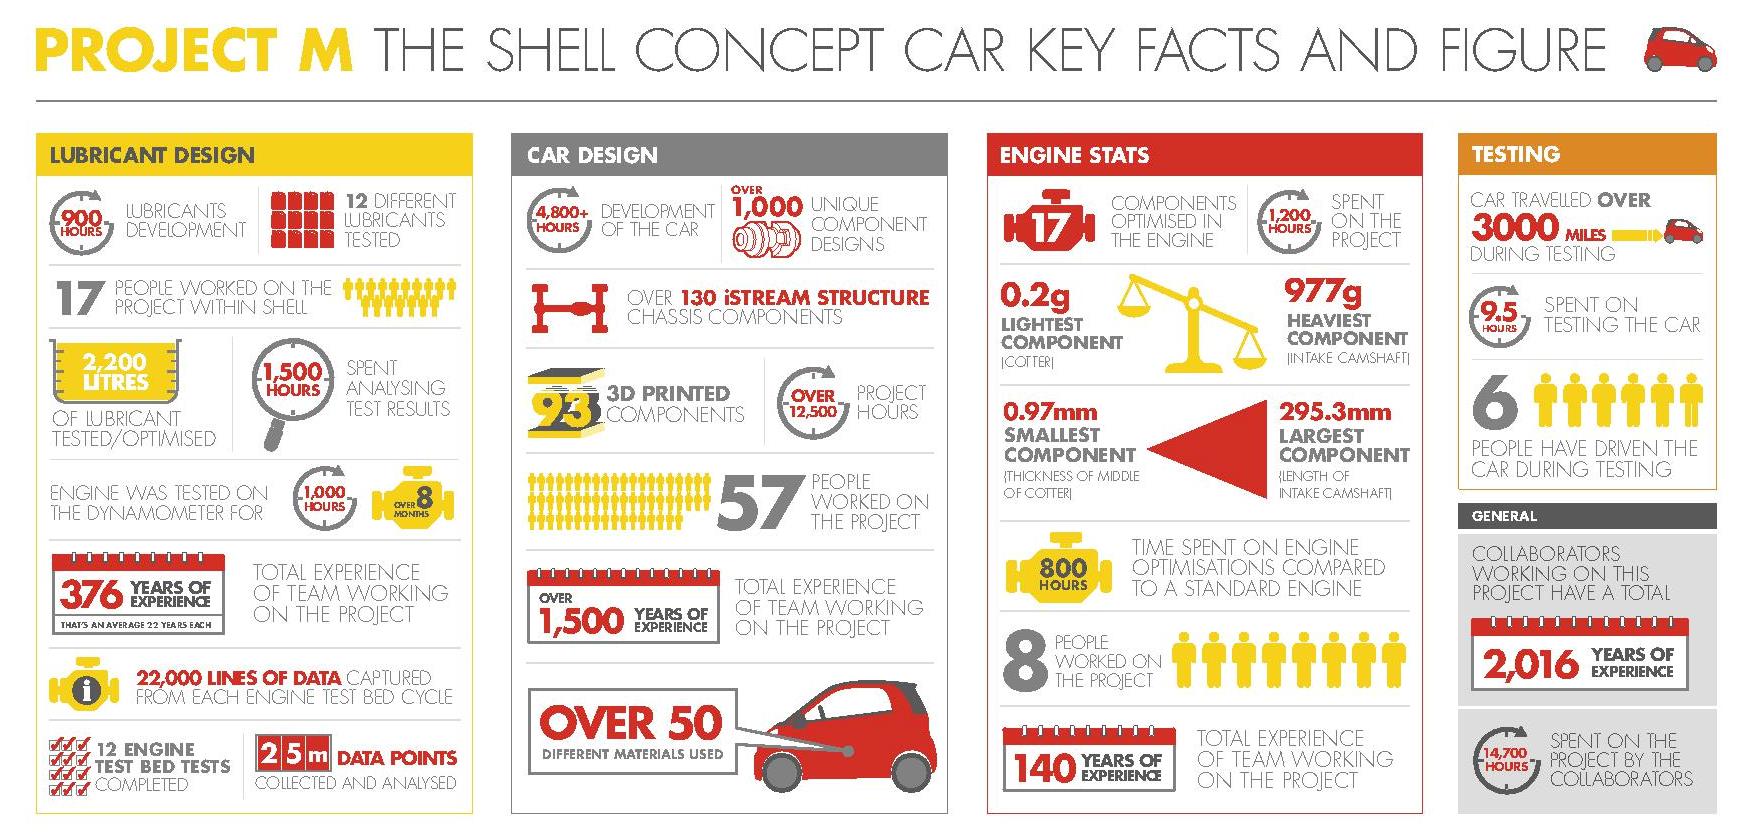 Shell Project M